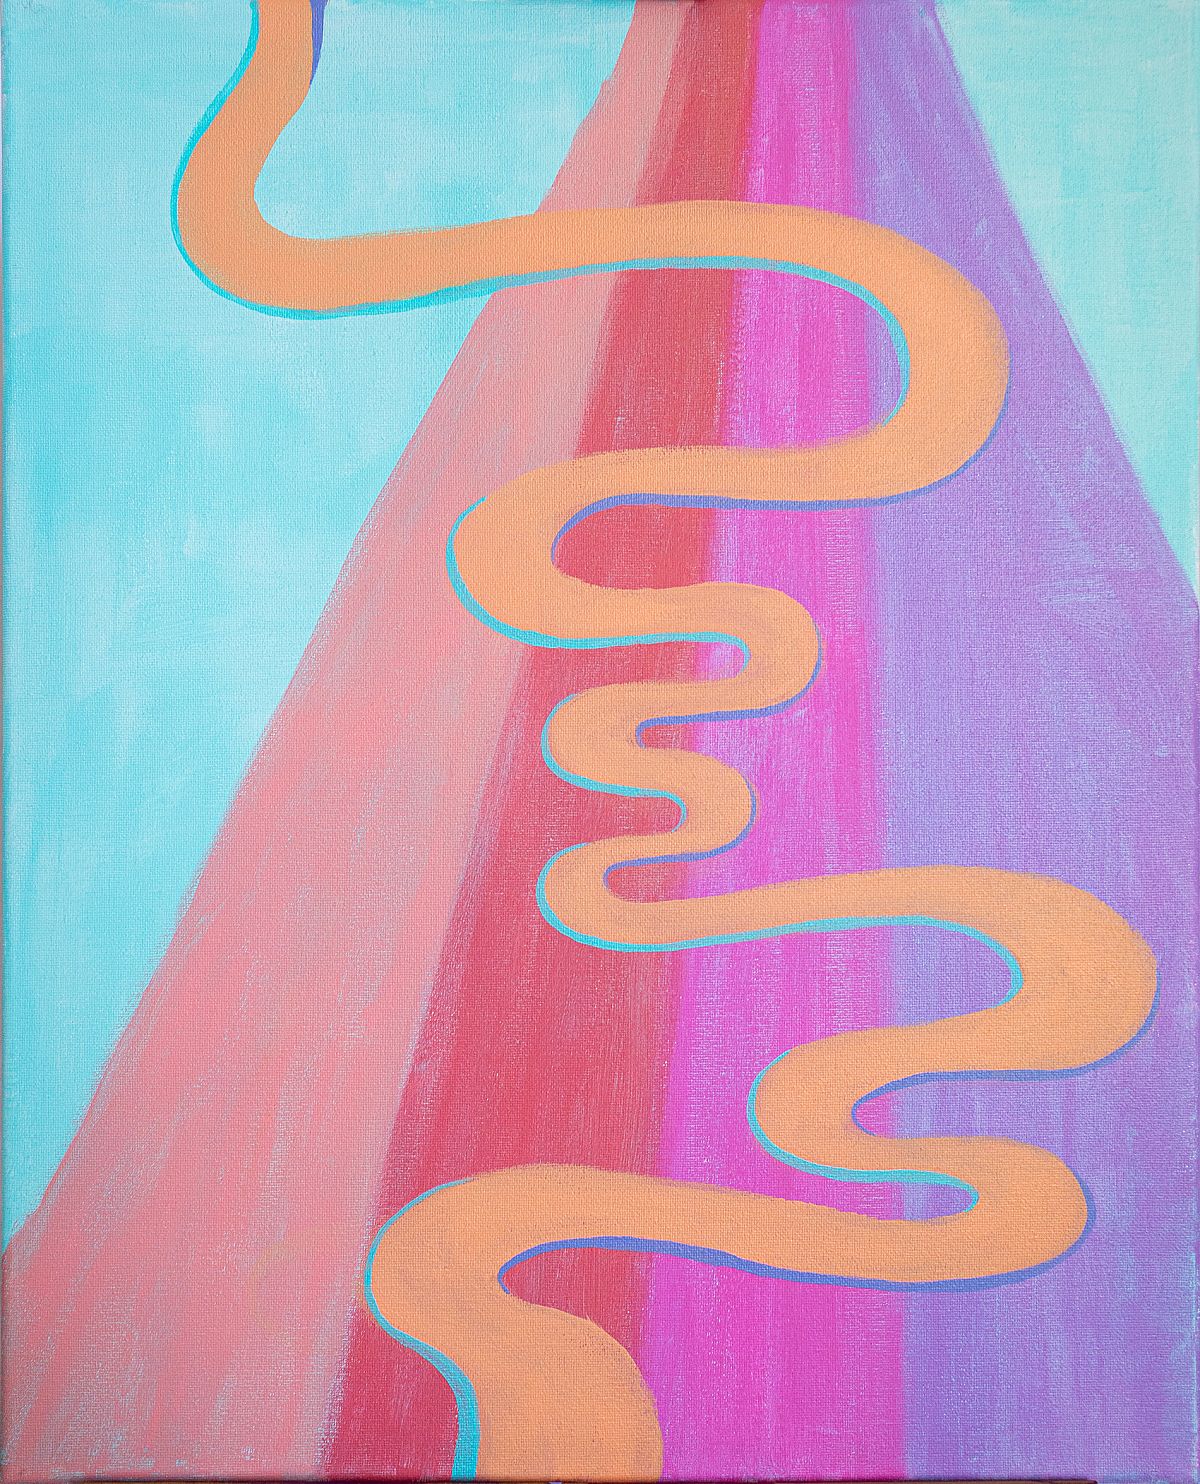 Ella Goldin, Pass the Hours, Acrylic on canvas, 16 x 20, 2021